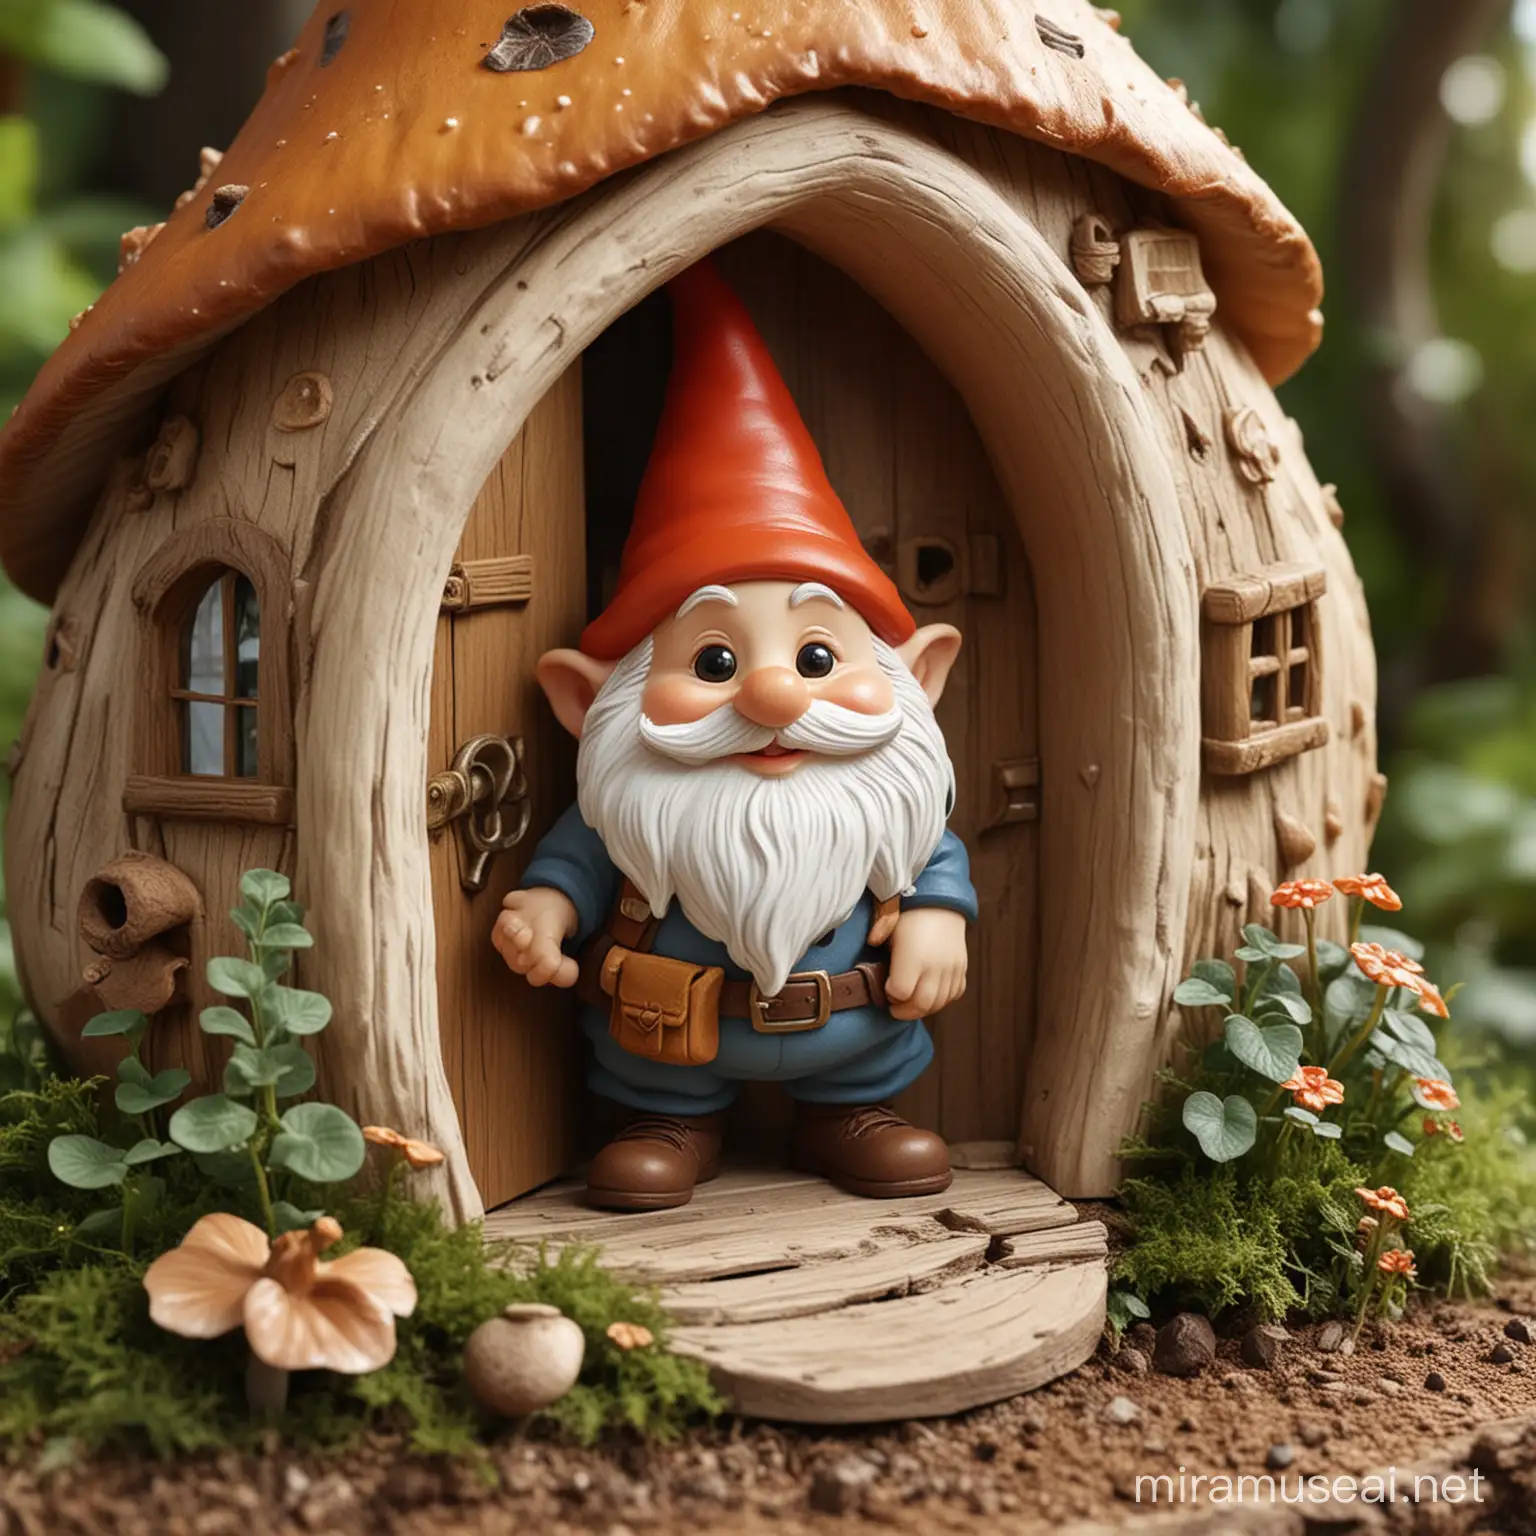 a small, funny, kind cartoon gnome lives in a house made inside a mushroom. there is an entrance door. there is a balcony on the mushroom cap. silent in a hammock in front of the house, teaching the caterpillar commands.